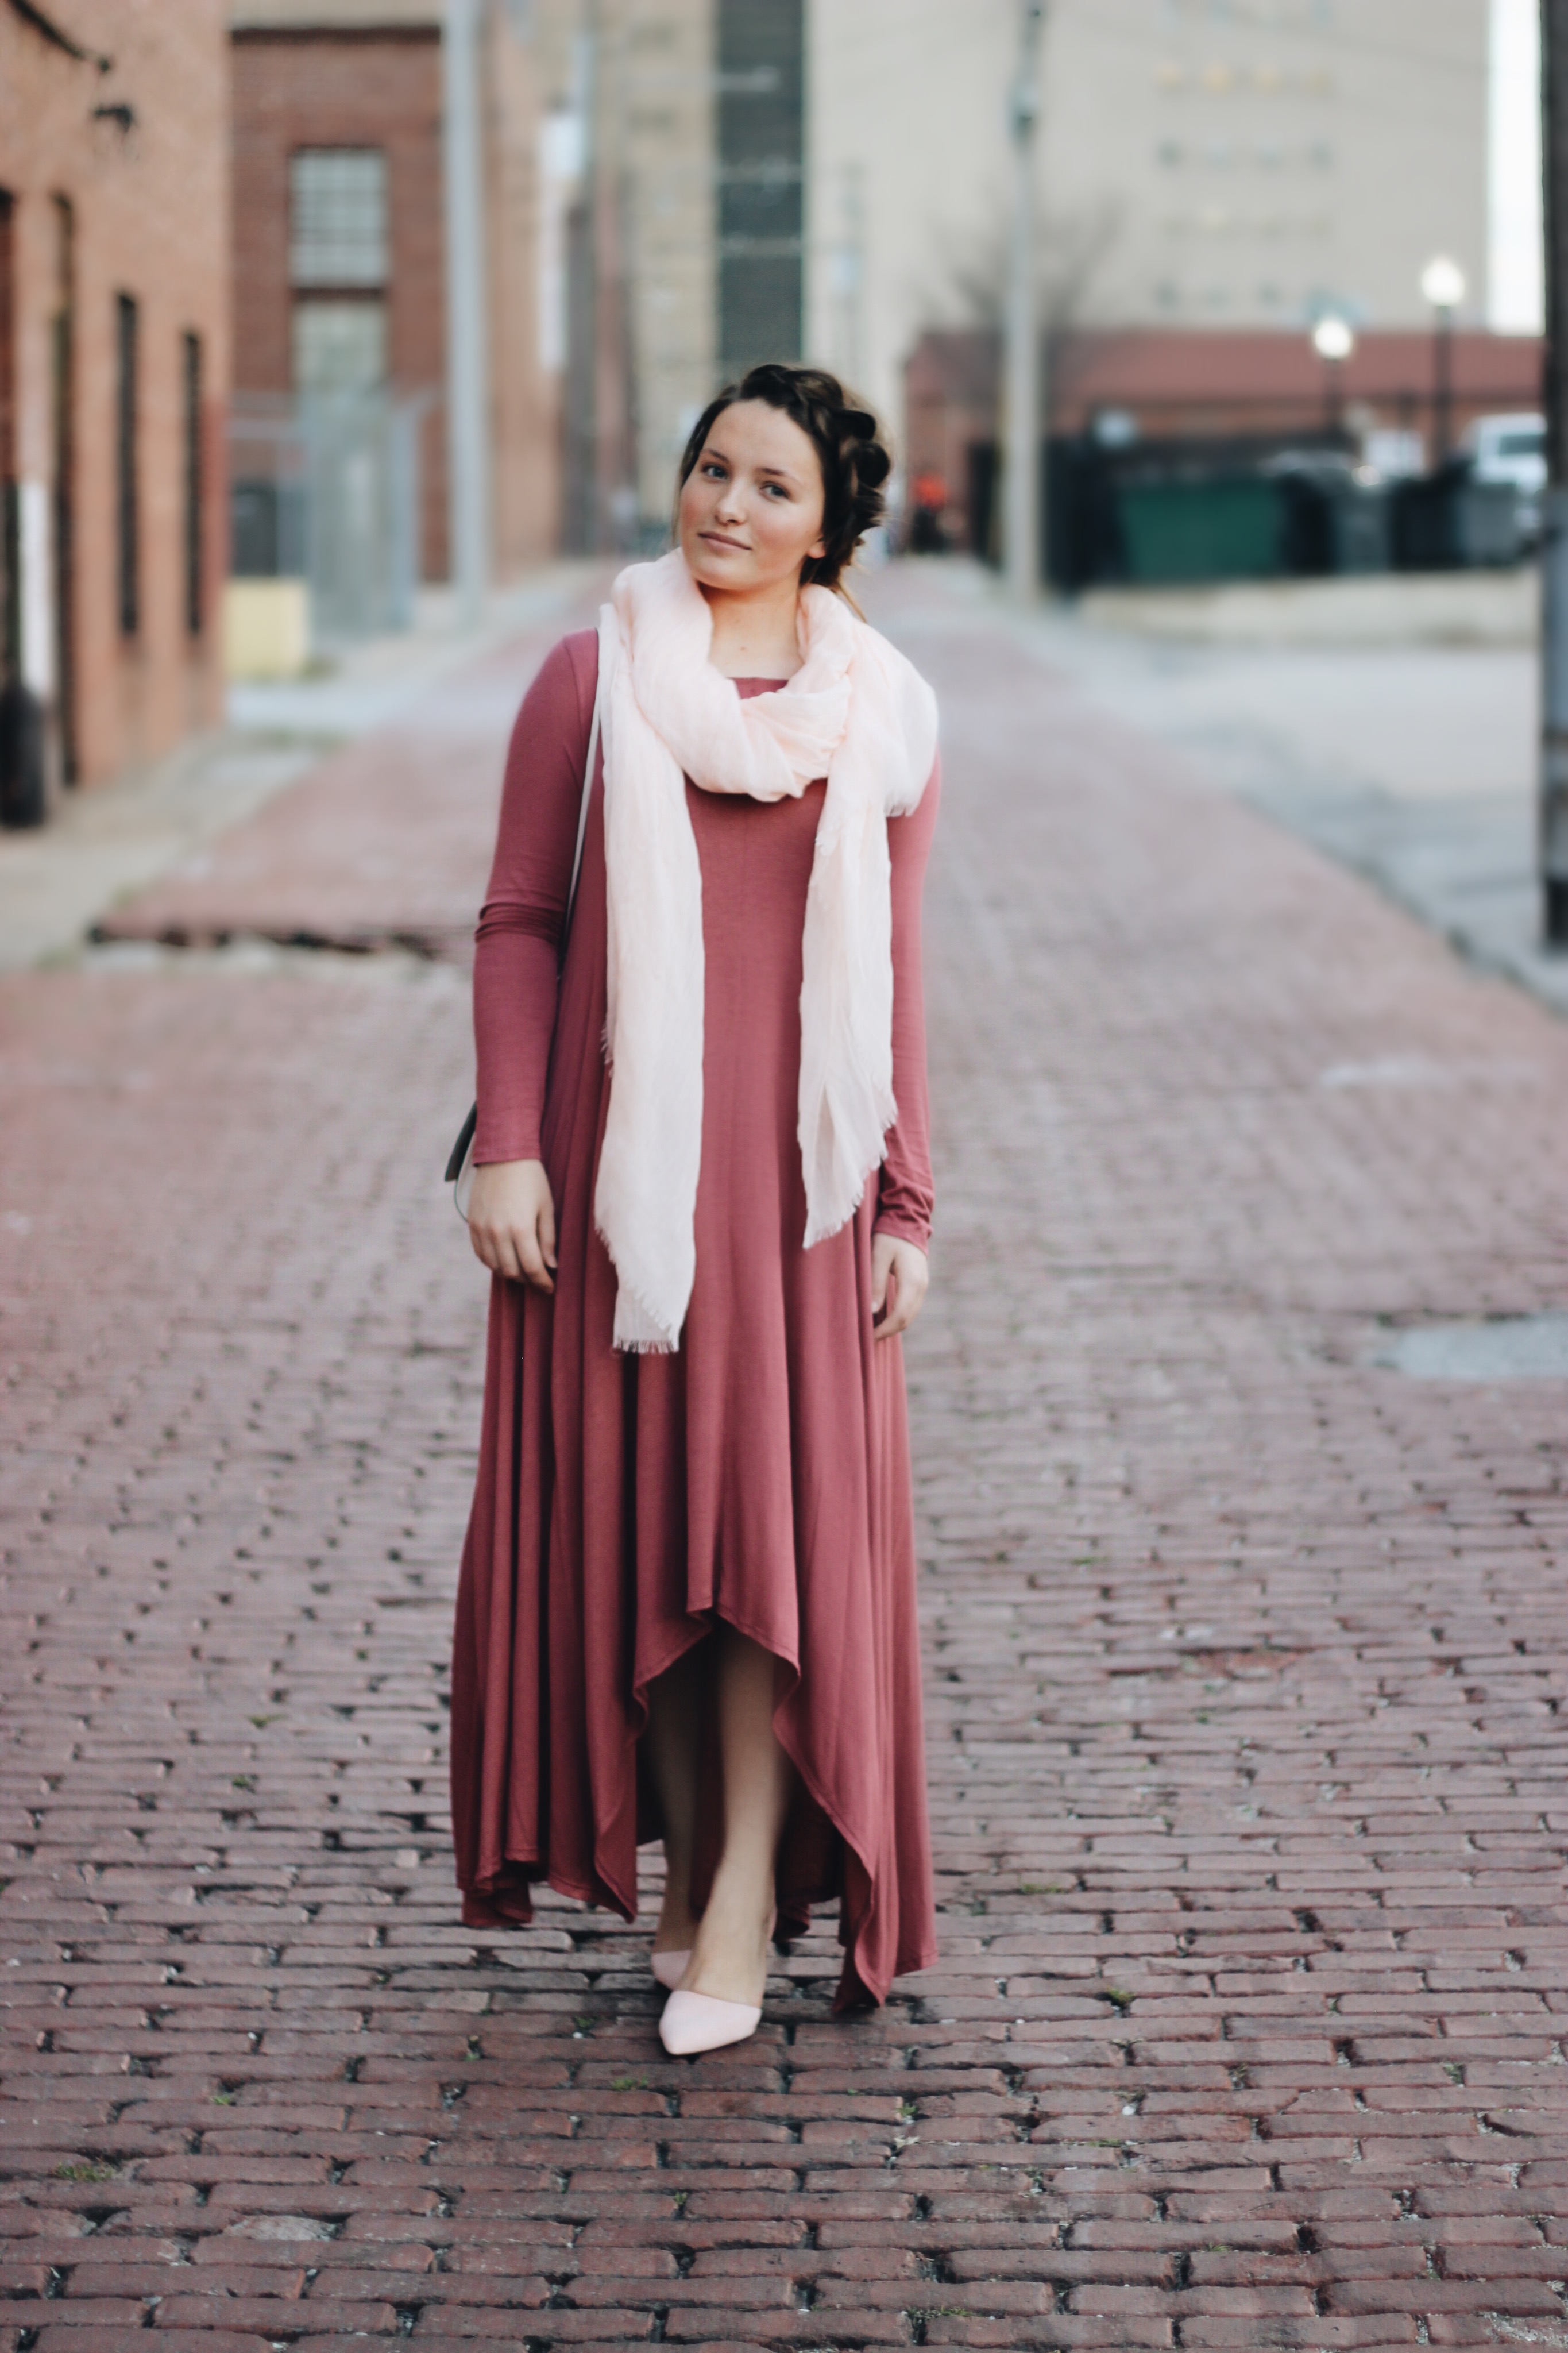 Outfit Inspiration Featuring Blush Tones